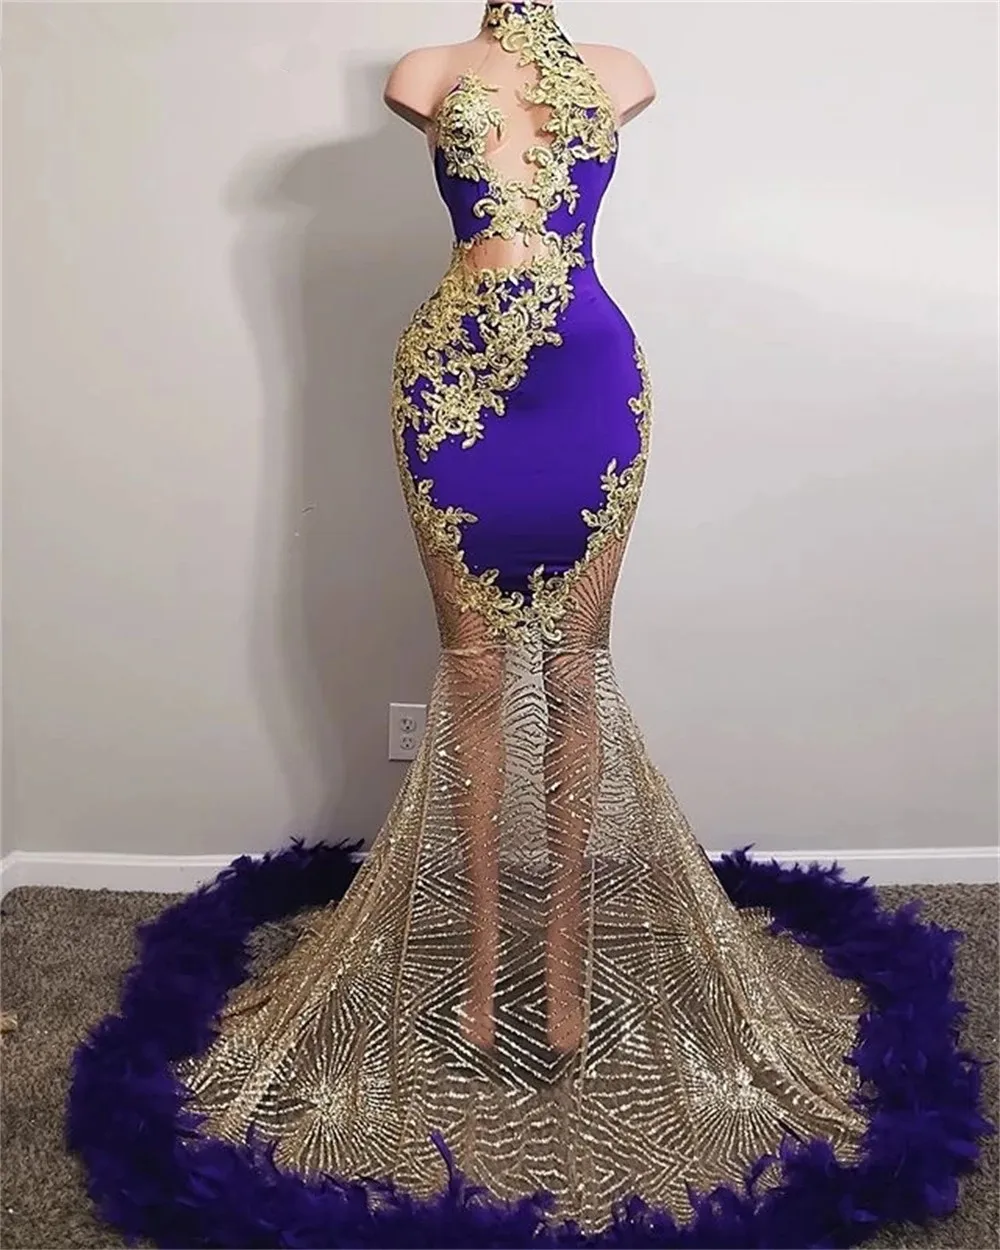 

Purple South African Prom Dresses Mermaid Halter Sequins Feather Black Girls Nigeria Robe De Soiree Evening Dresses Gown